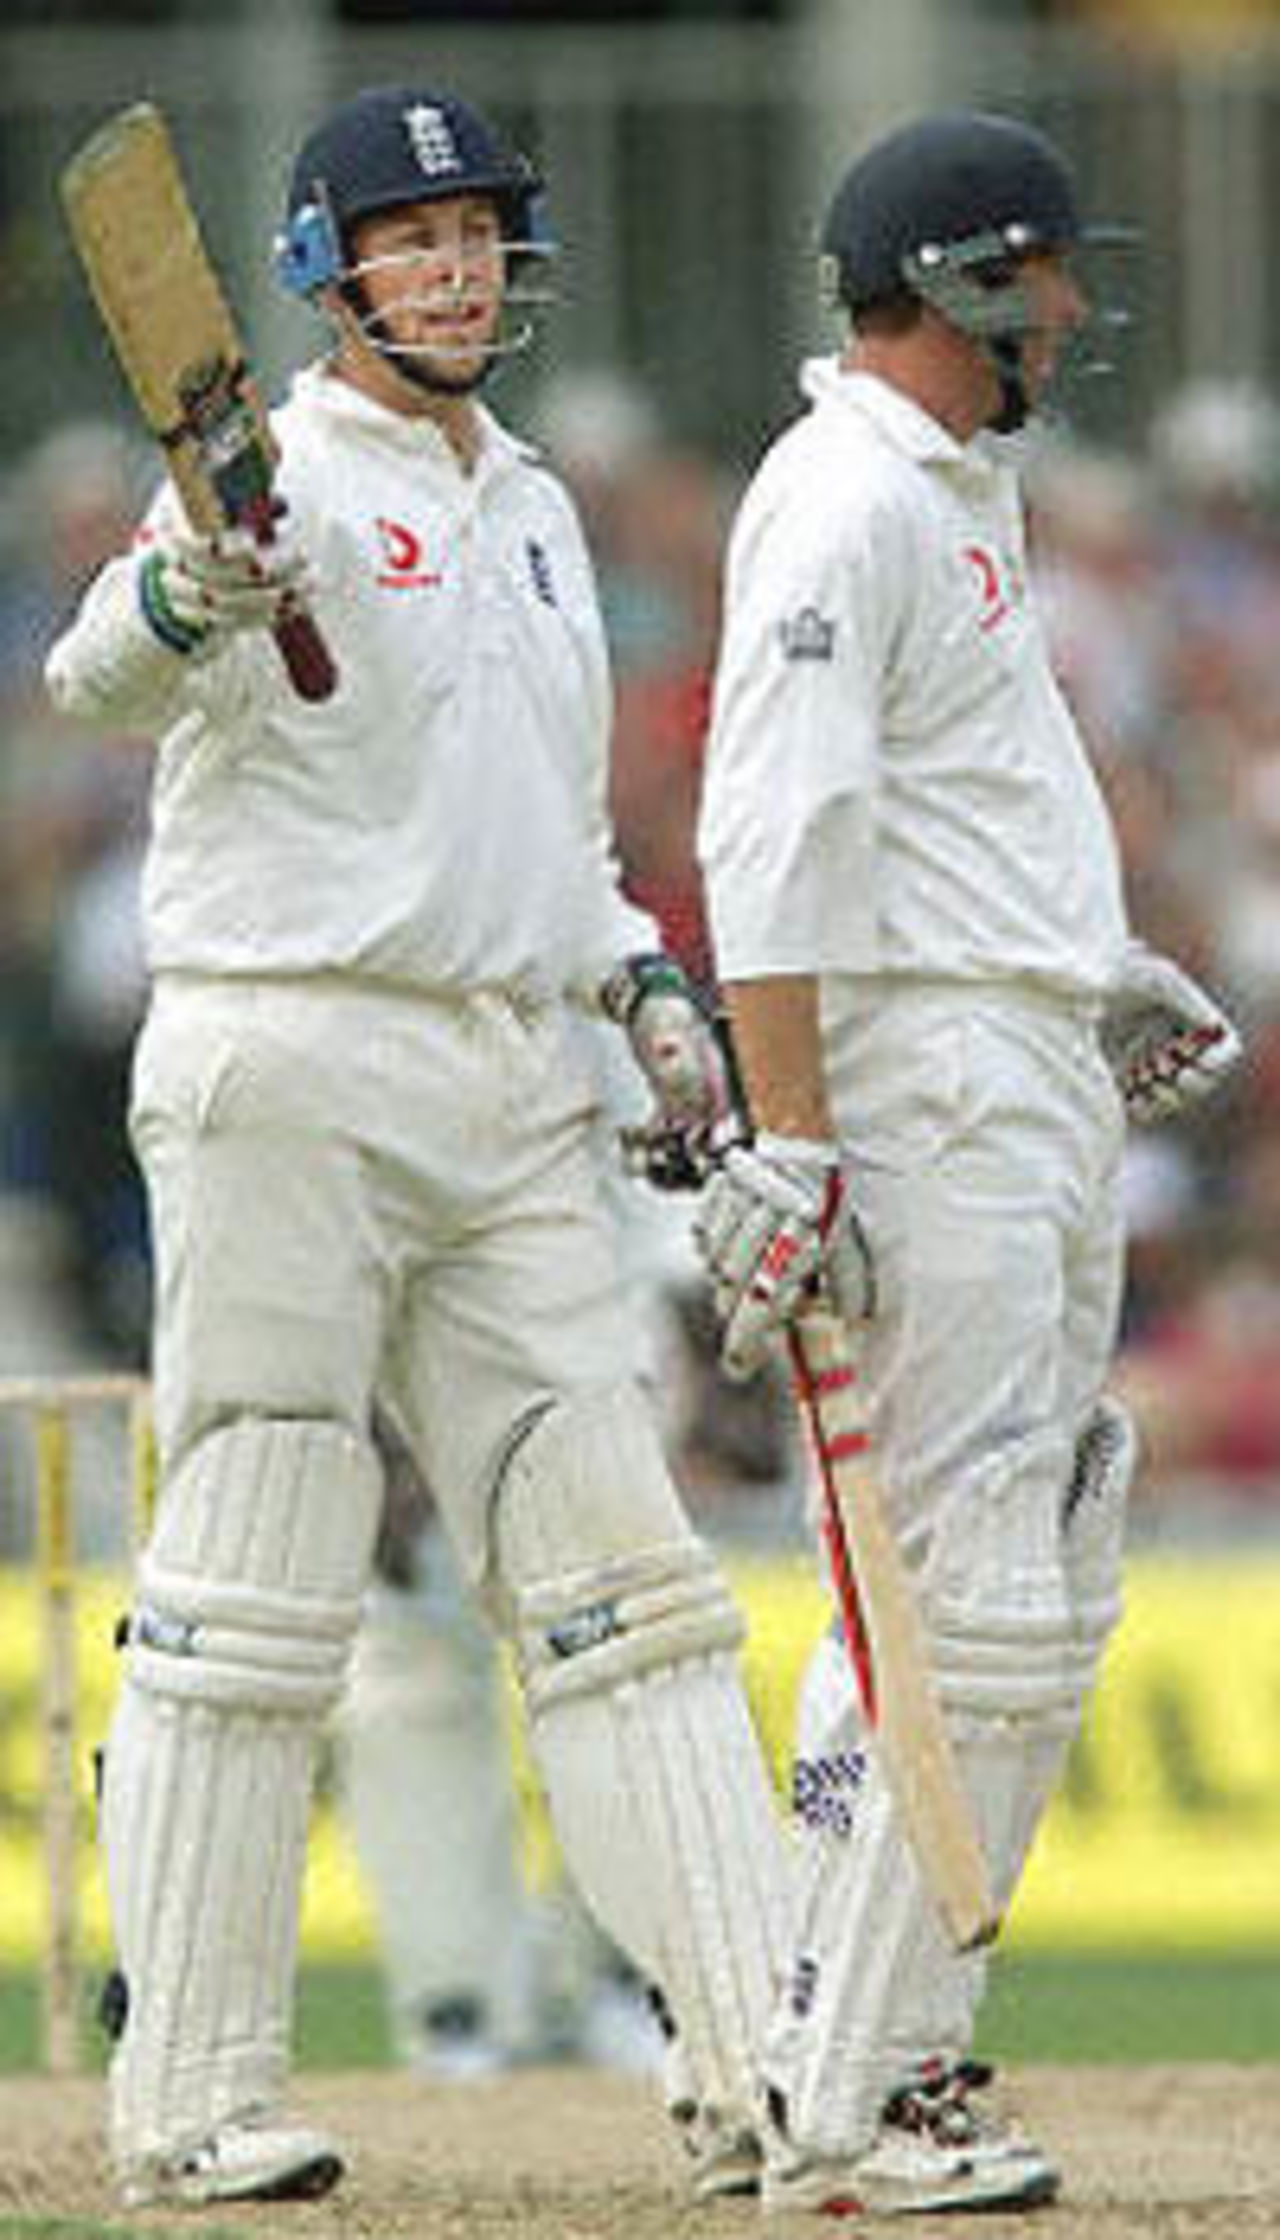 England's opening batsman Marcus Trescothick (L) holds his bat up after reaching his 50 next to Mike Atherton (R) during the Fifth Test against the West Indies at the Oval in London. Trescothick was later caught by Campbell of Nagamootoo's bowling for 78. The Wisden Trophy, 2000, 5th Test, England v West Indies, Kennington Oval, London, 31Aug-04Sep 2000 (Day 1)